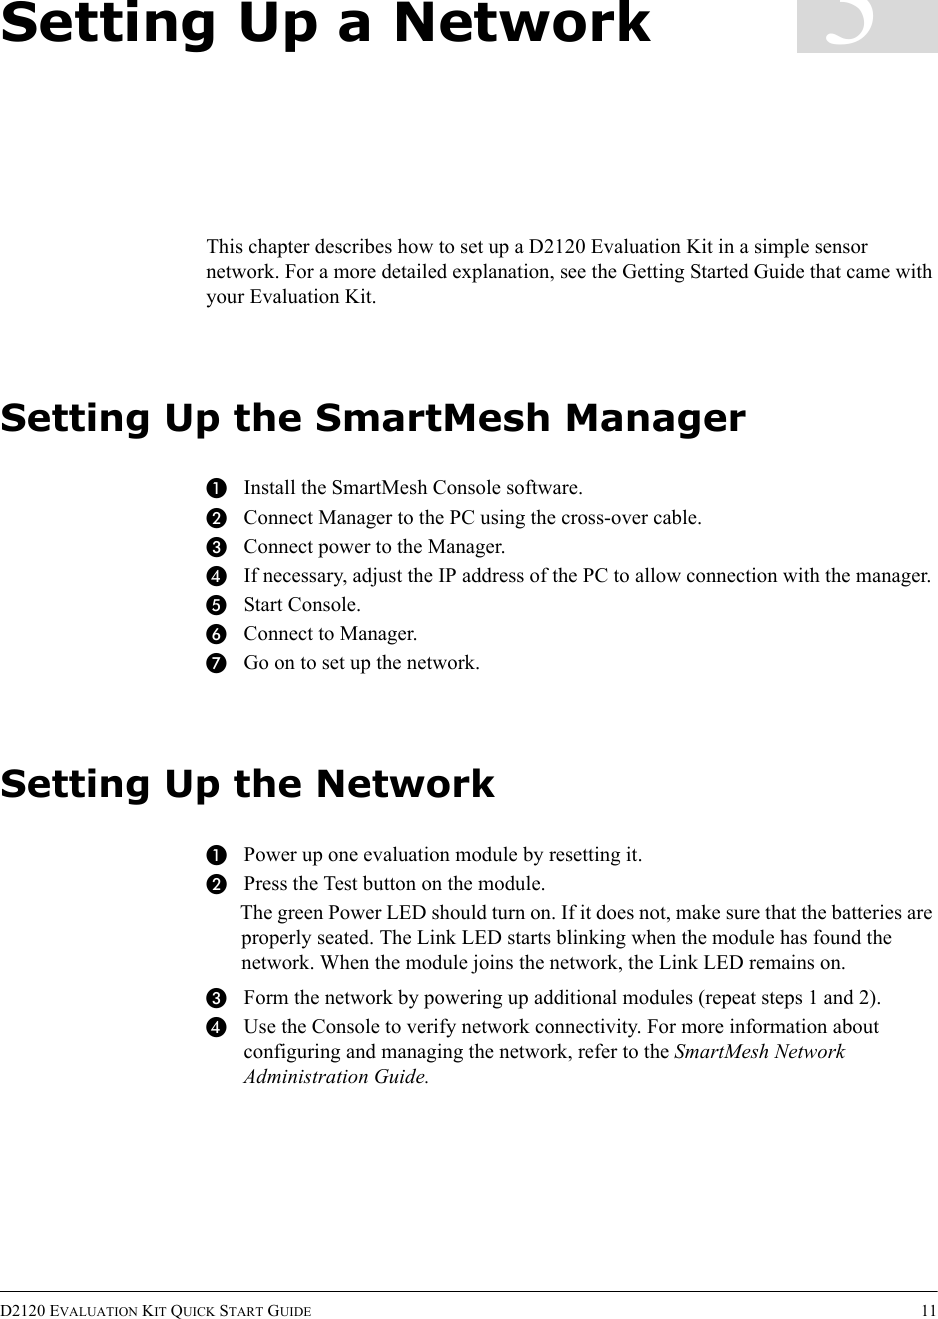 D2120 EVALUATION KIT QUICK START GUIDE 113Setting Up a NetworkThis chapter describes how to set up a D2120 Evaluation Kit in a simple sensor network. For a more detailed explanation, see the Getting Started Guide that came with your Evaluation Kit.Setting Up the SmartMesh ManagerAInstall the SmartMesh Console software.BConnect Manager to the PC using the cross-over cable.CConnect power to the Manager.DIf necessary, adjust the IP address of the PC to allow connection with the manager.EStart Console.FConnect to Manager.GGo on to set up the network.Setting Up the NetworkAPower up one evaluation module by resetting it.BPress the Test button on the module.The green Power LED should turn on. If it does not, make sure that the batteries are properly seated. The Link LED starts blinking when the module has found the network. When the module joins the network, the Link LED remains on.CForm the network by powering up additional modules (repeat steps 1 and 2).DUse the Console to verify network connectivity. For more information about configuring and managing the network, refer to the SmartMesh Network Administration Guide.